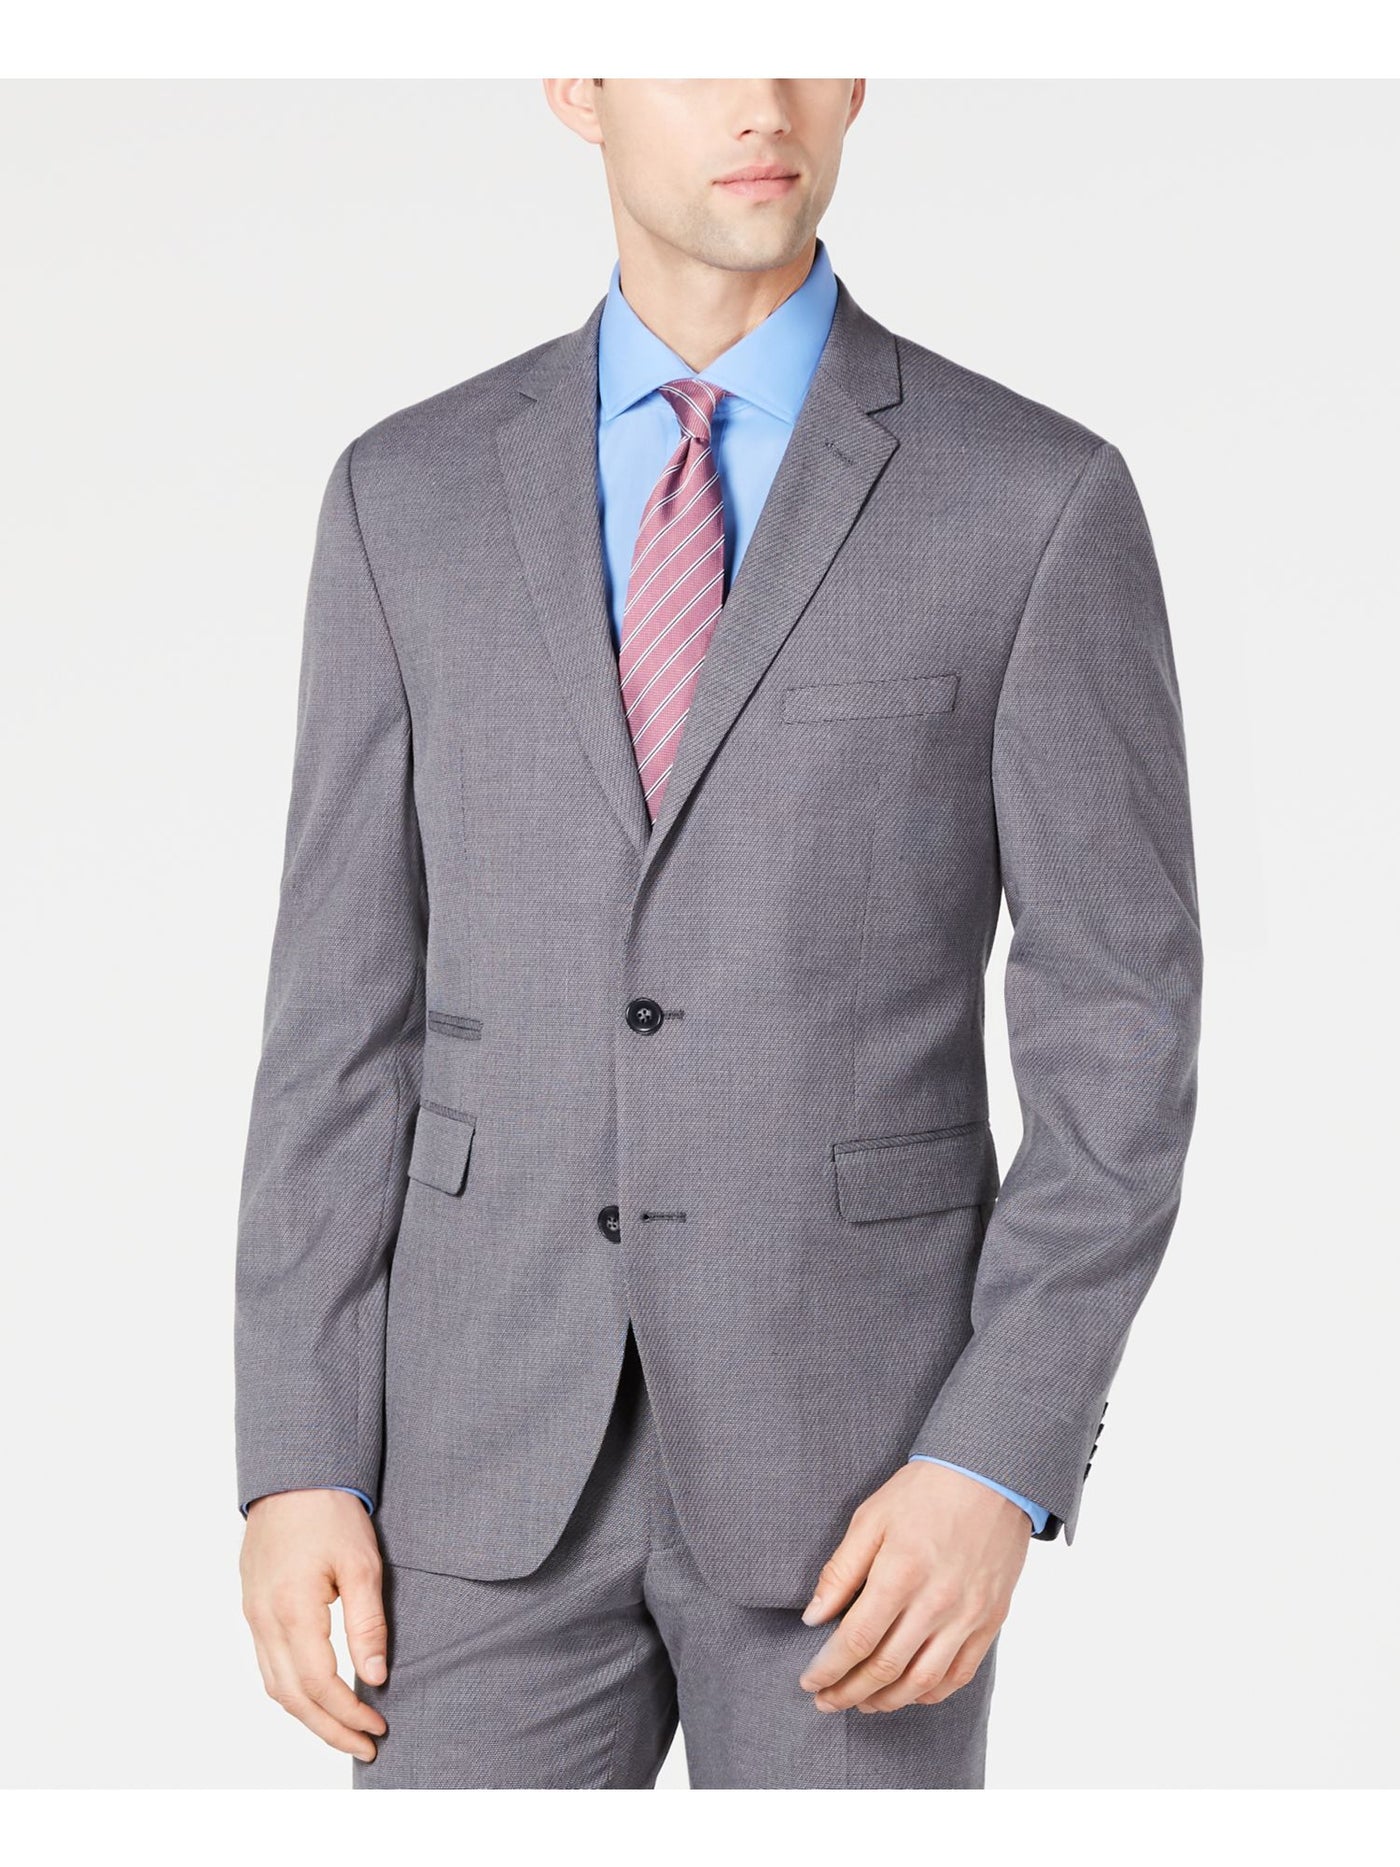 VINCE CAMUTO Mens Gray Single Breasted, Stretch, Slim Fit Wrinkle Resistant Suit Separate Blazer Jacket 36R